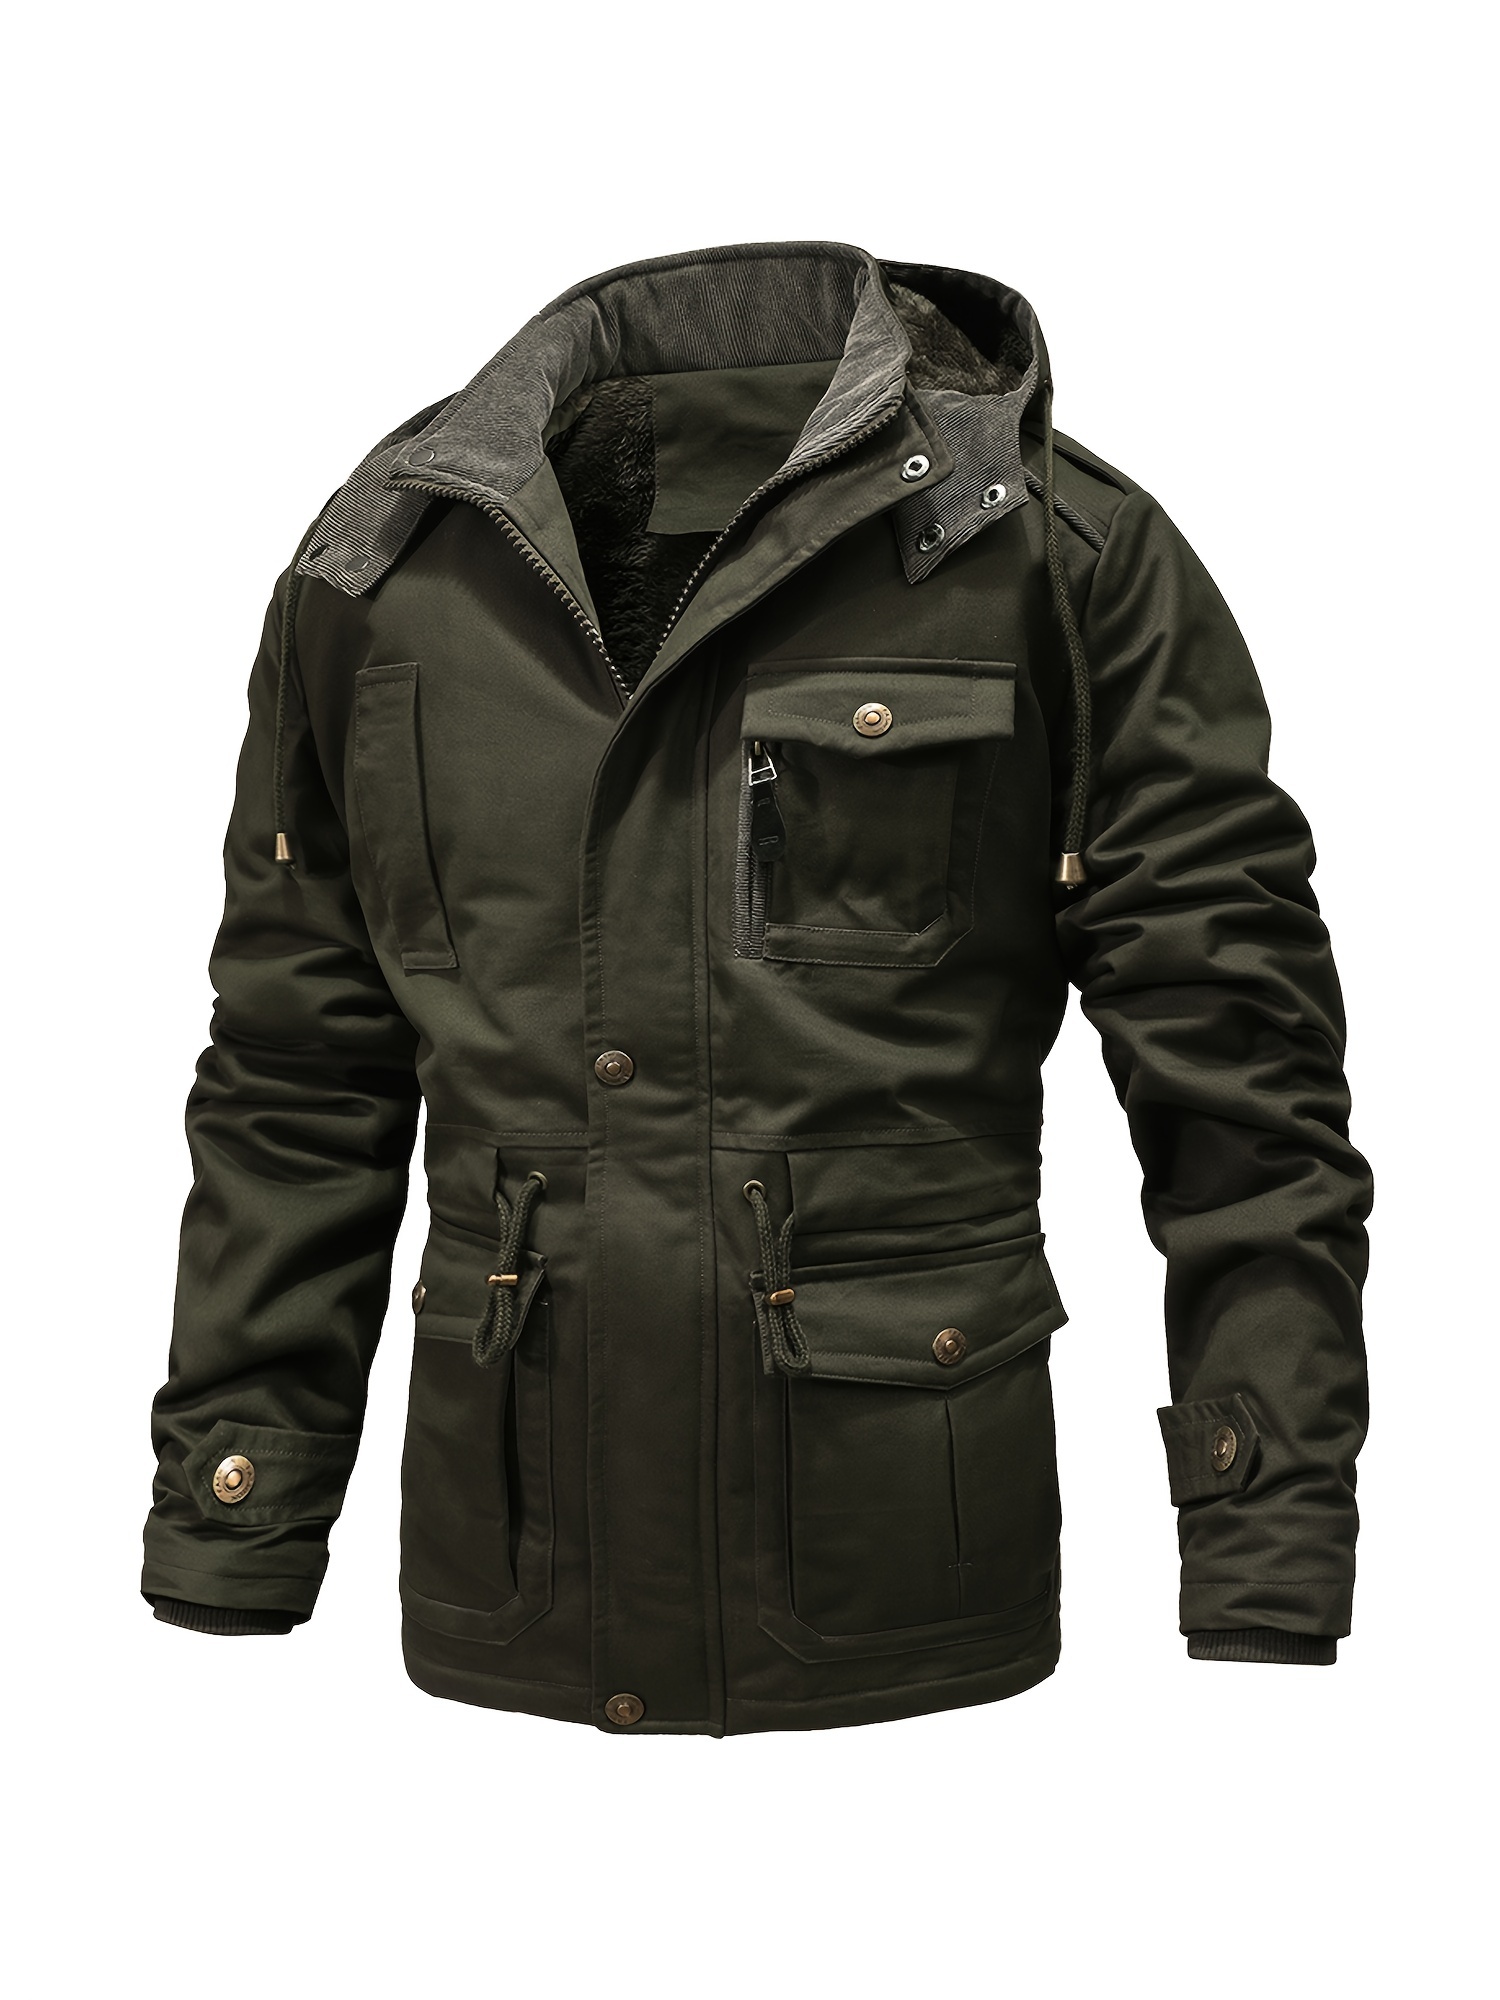 Mens Camo Military Jackets Versatile Tactical Jacket Hood Casual Outdoor  Versatile Warm Coats with Multiple Pockets at  Men's Clothing store